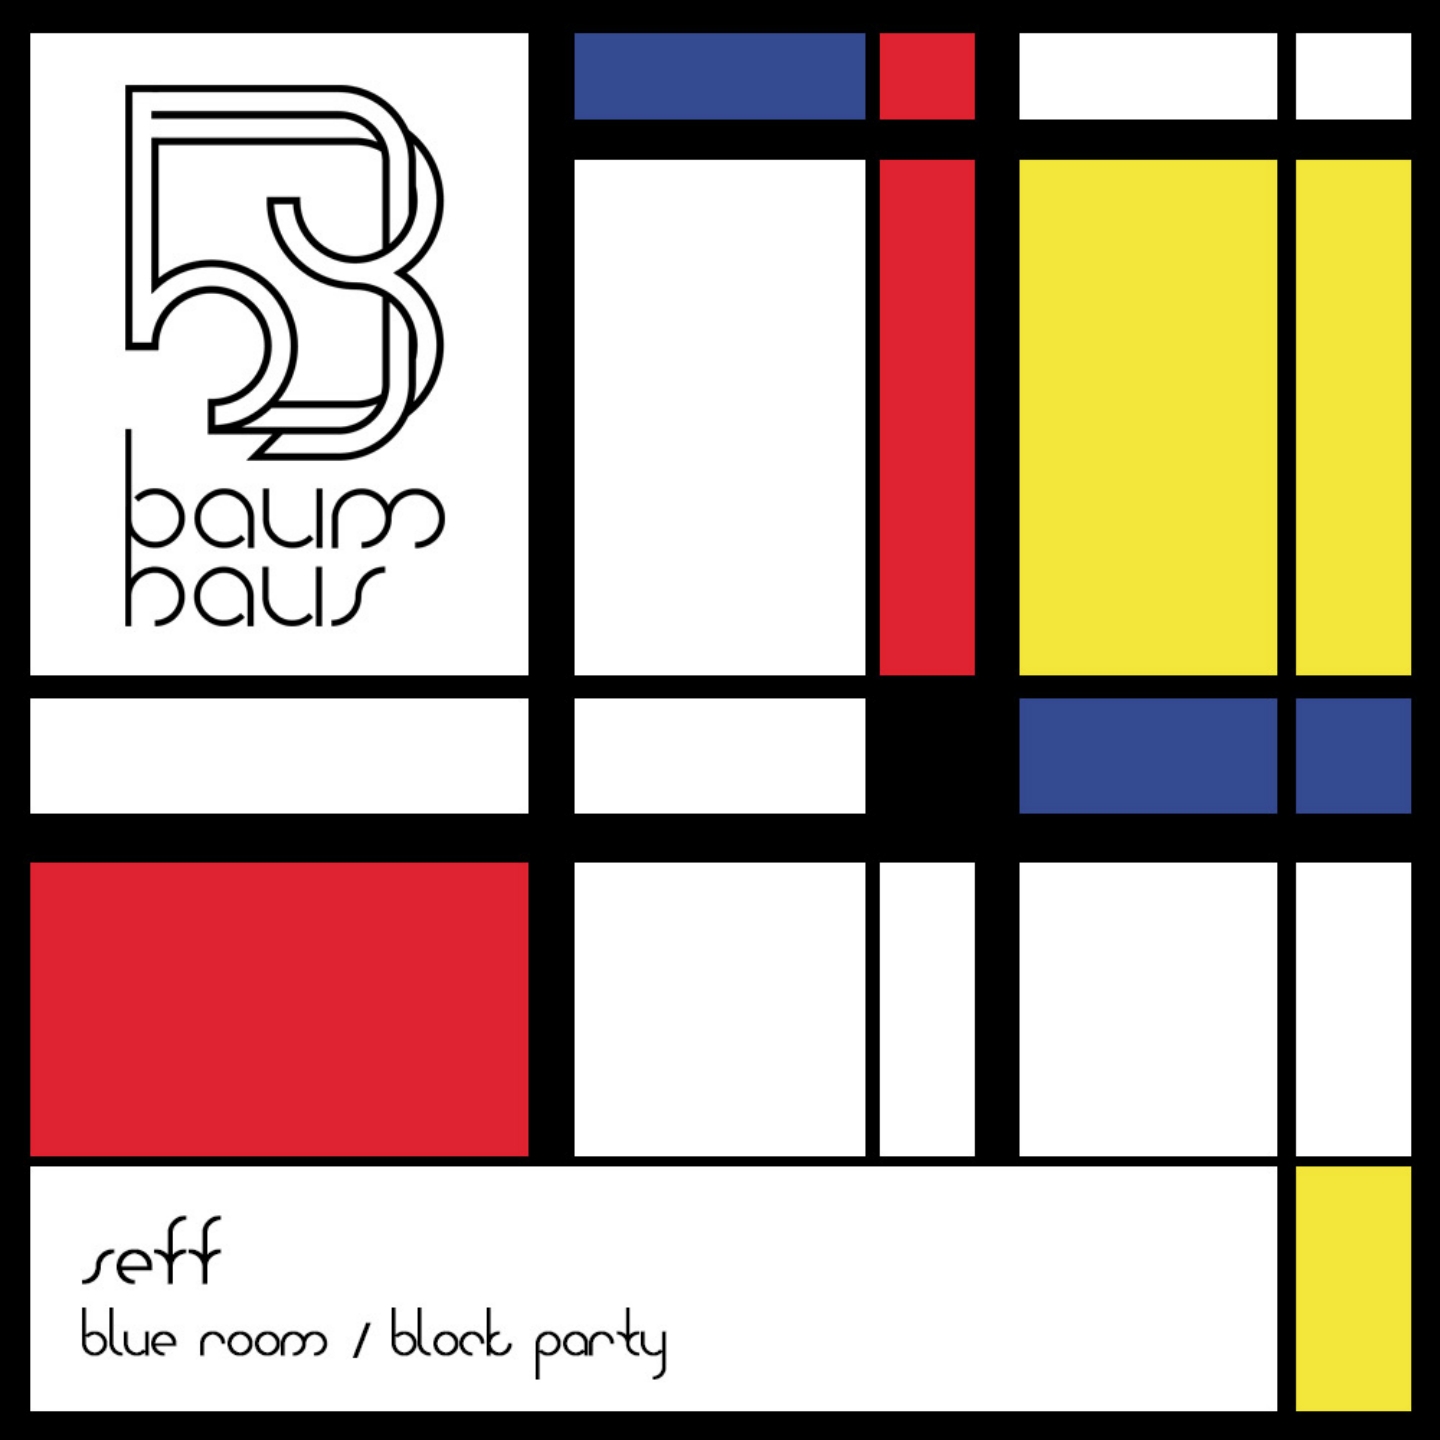 Blue Room / Block Party